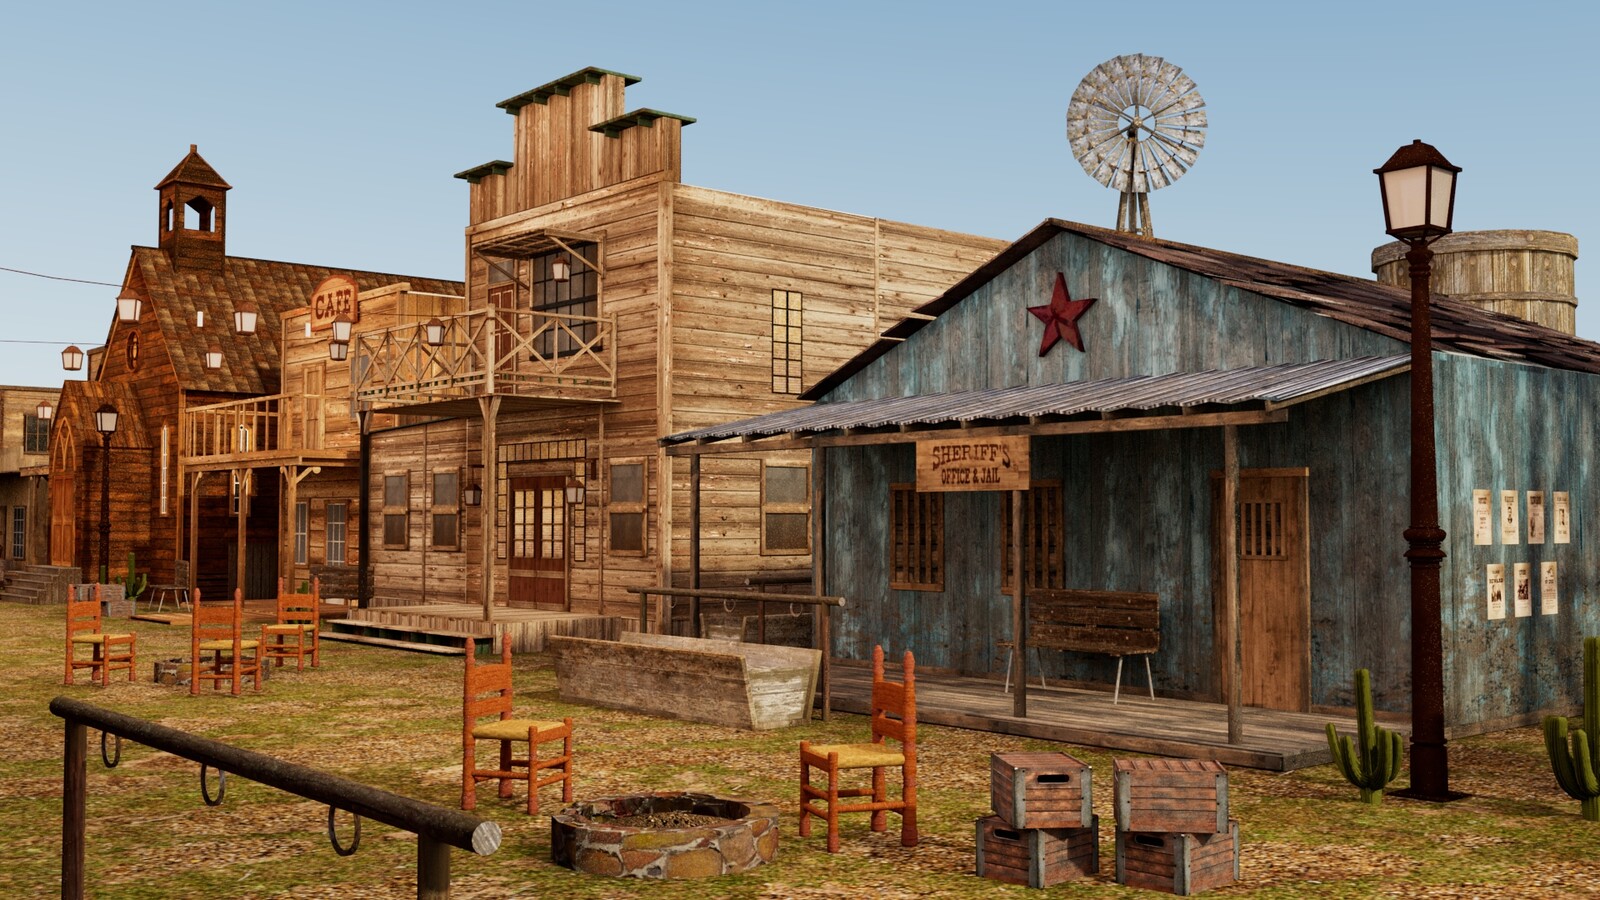 (left to right)
Church, saloon, sheriff's office.